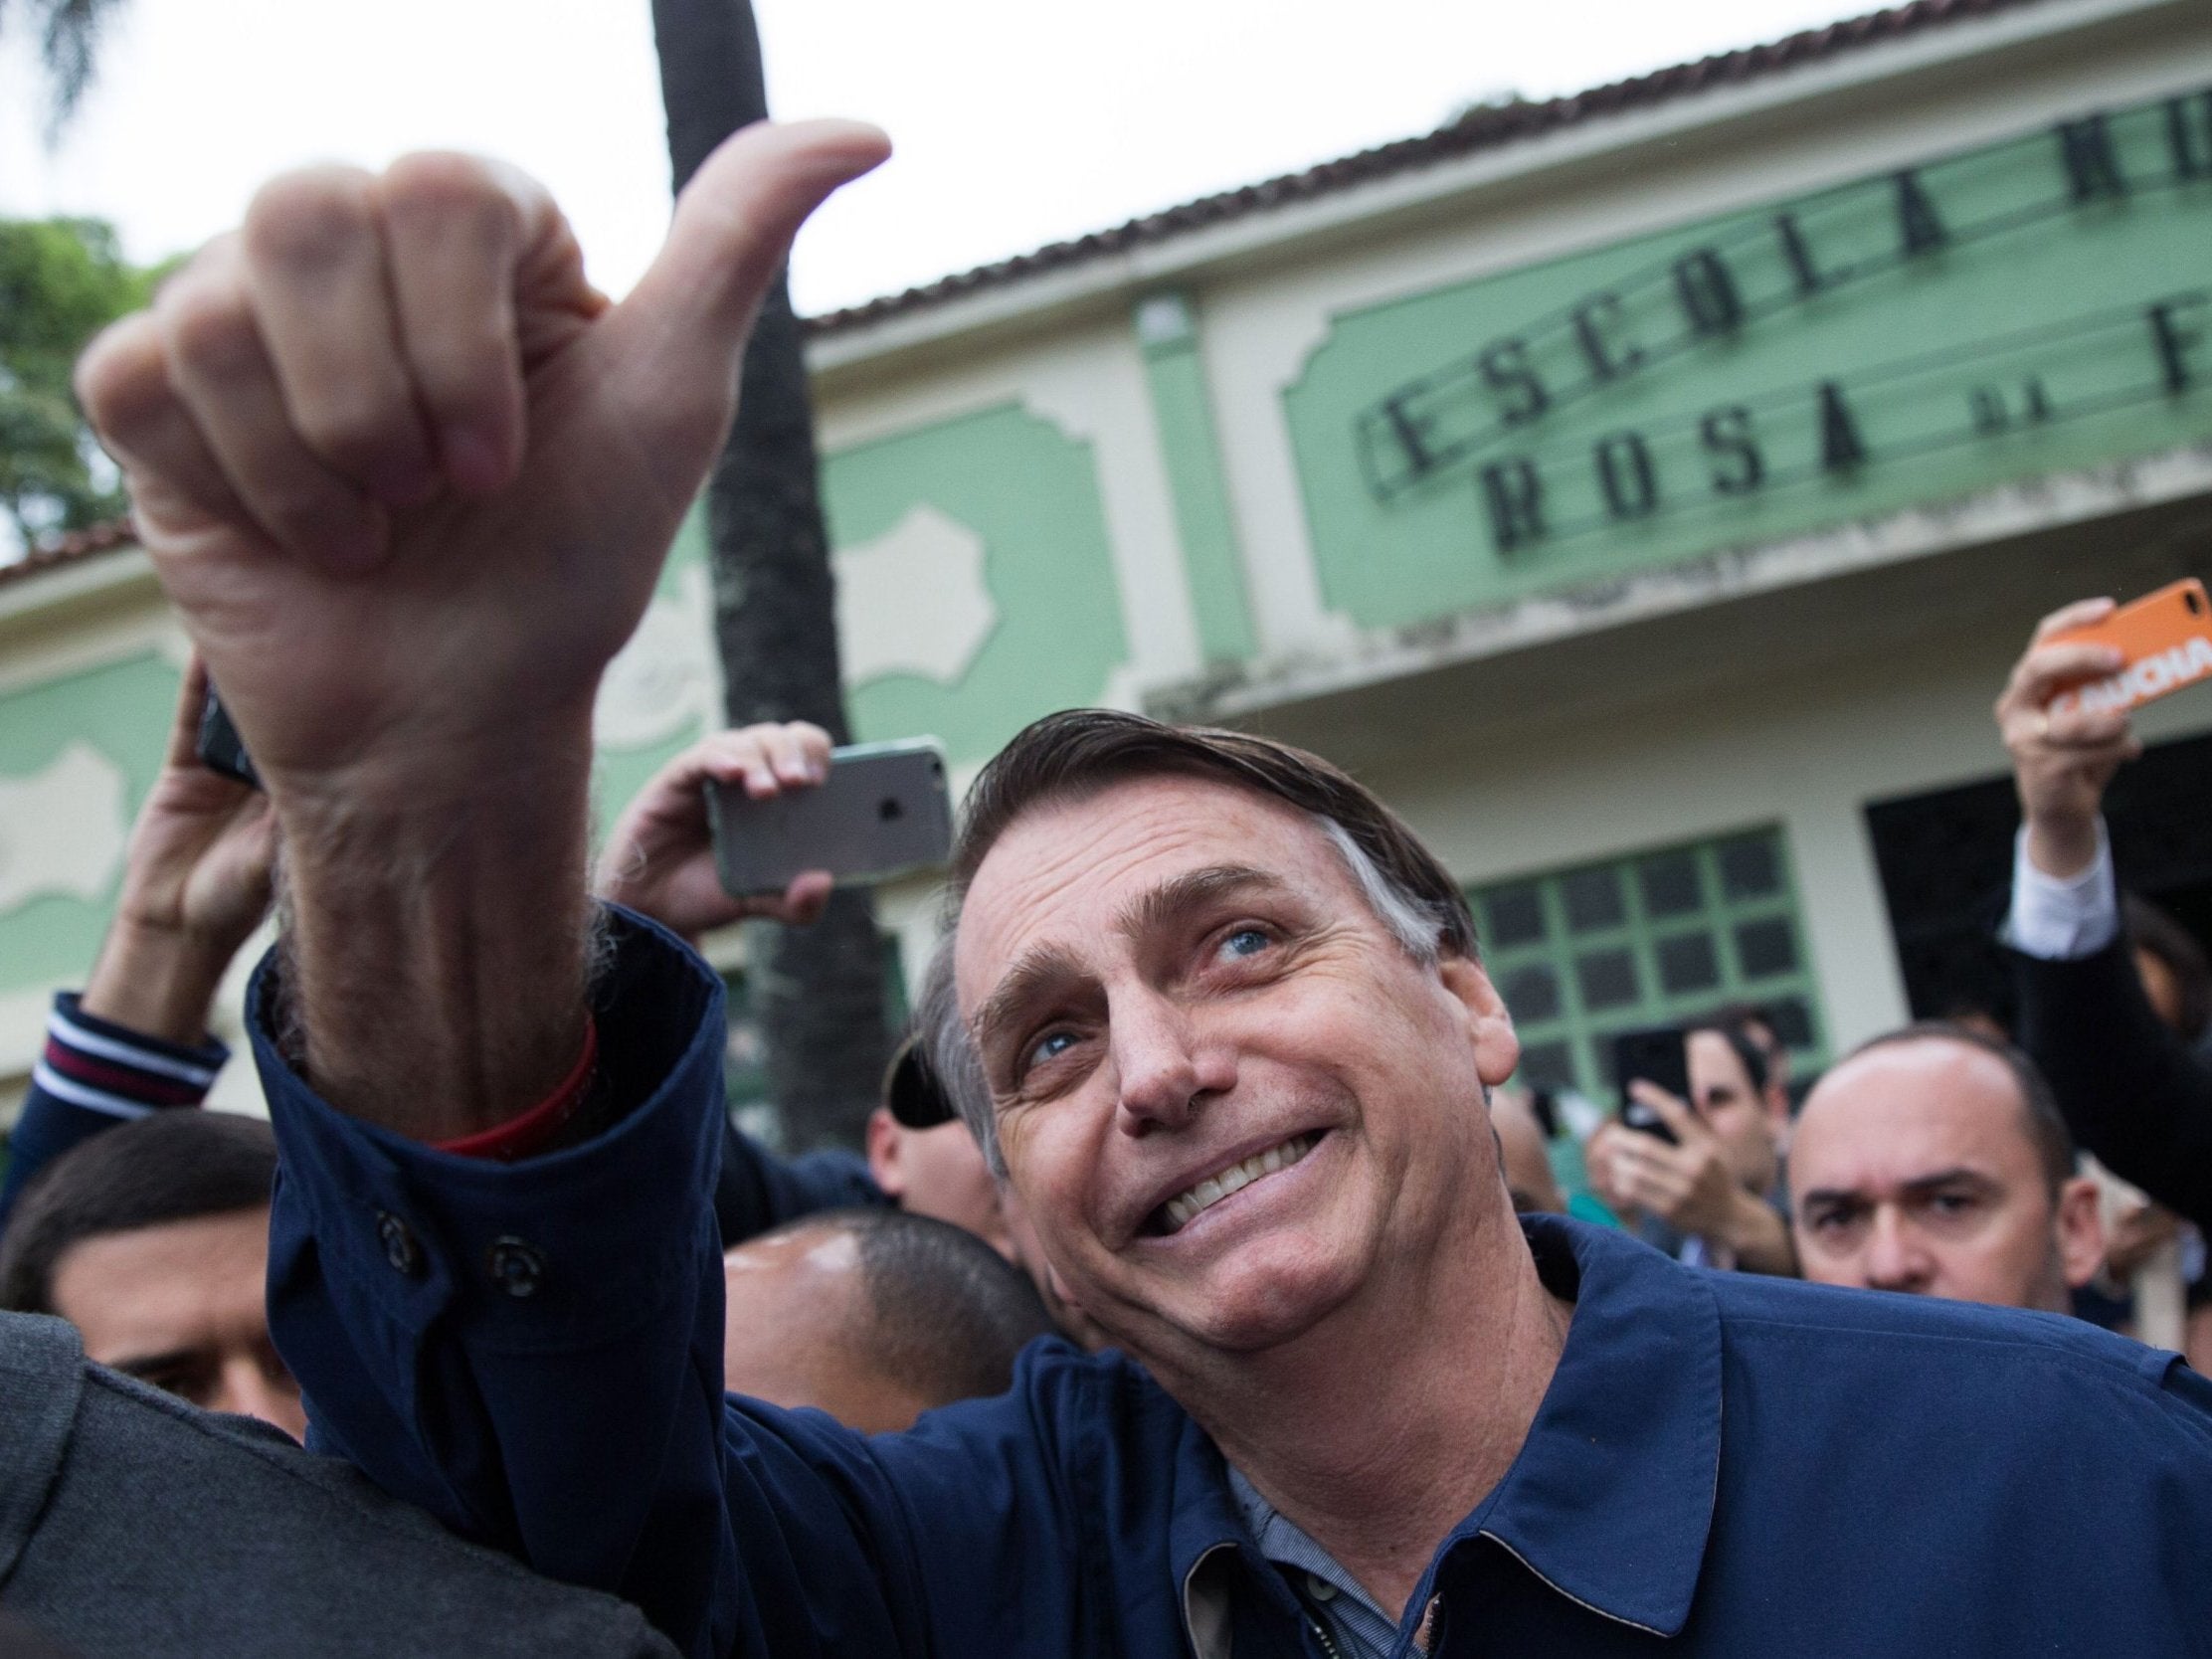 Bolsonaro is poised to seize power in Brazil